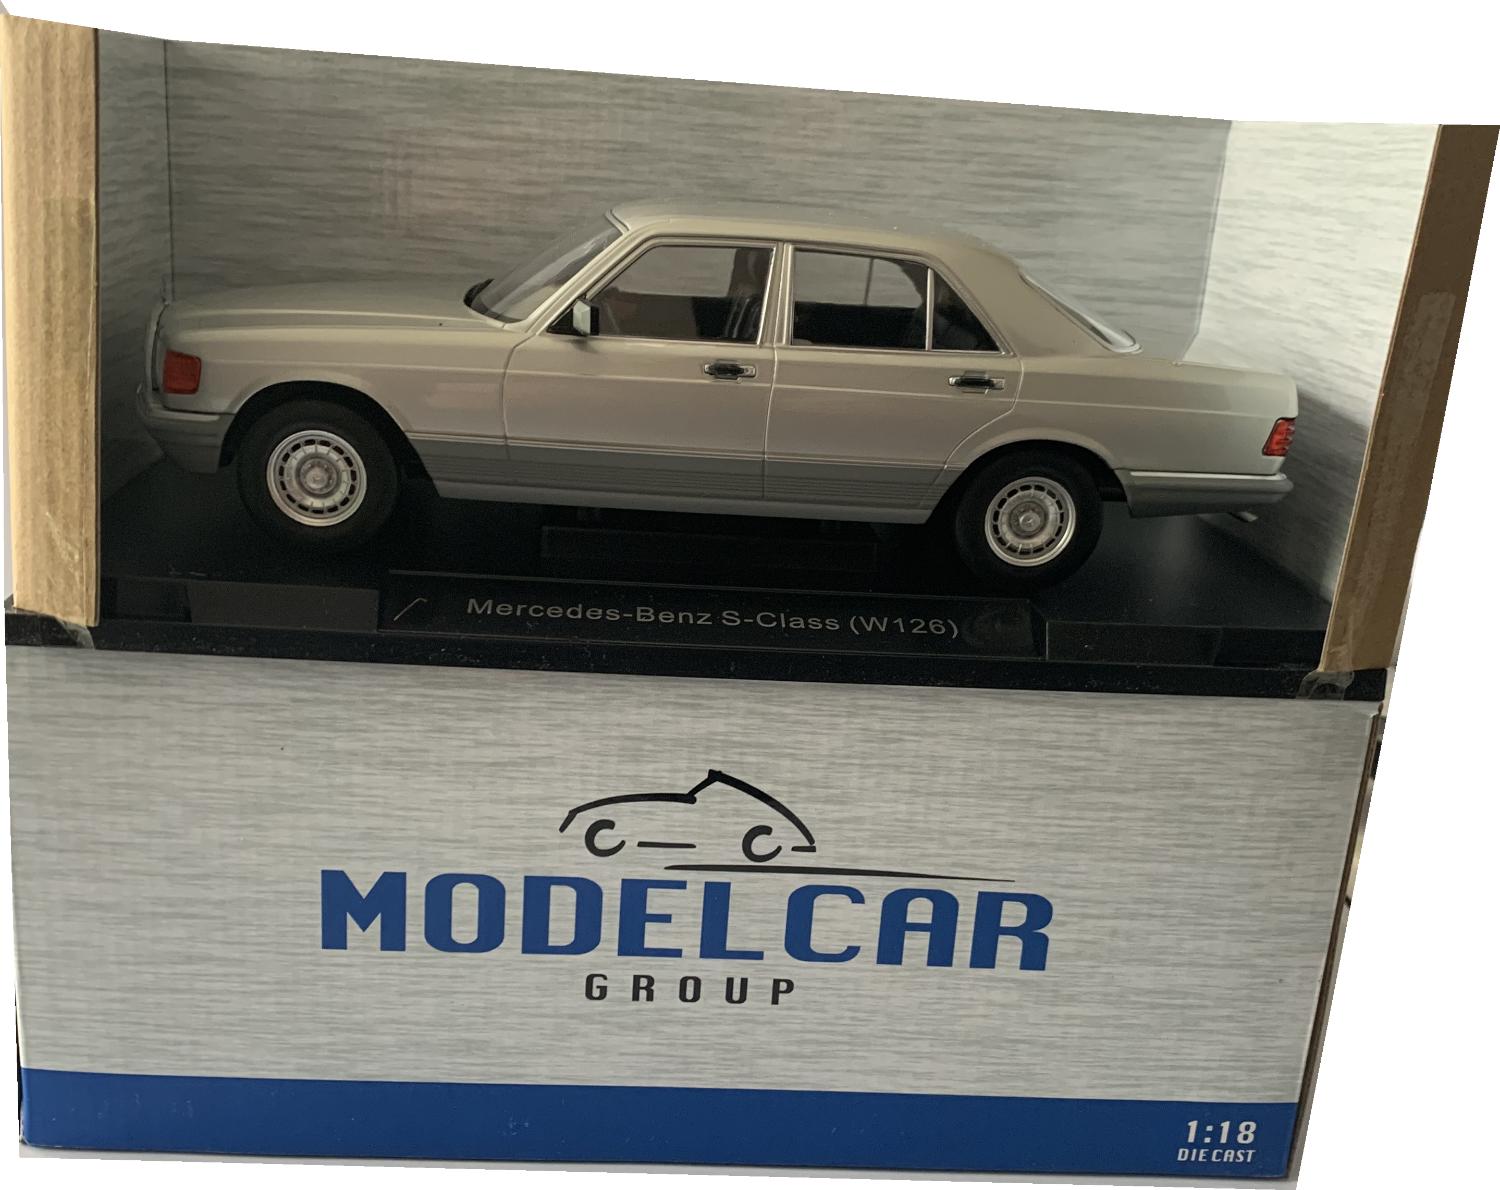 An excellent scale model of the Mercedes Benz S Class with high level of detail throughout, all authentically recreated.  Model is presented on a removable plinth in a window display box.  The car is approx. 27.5 cm long and the presentation box is 31 cm long